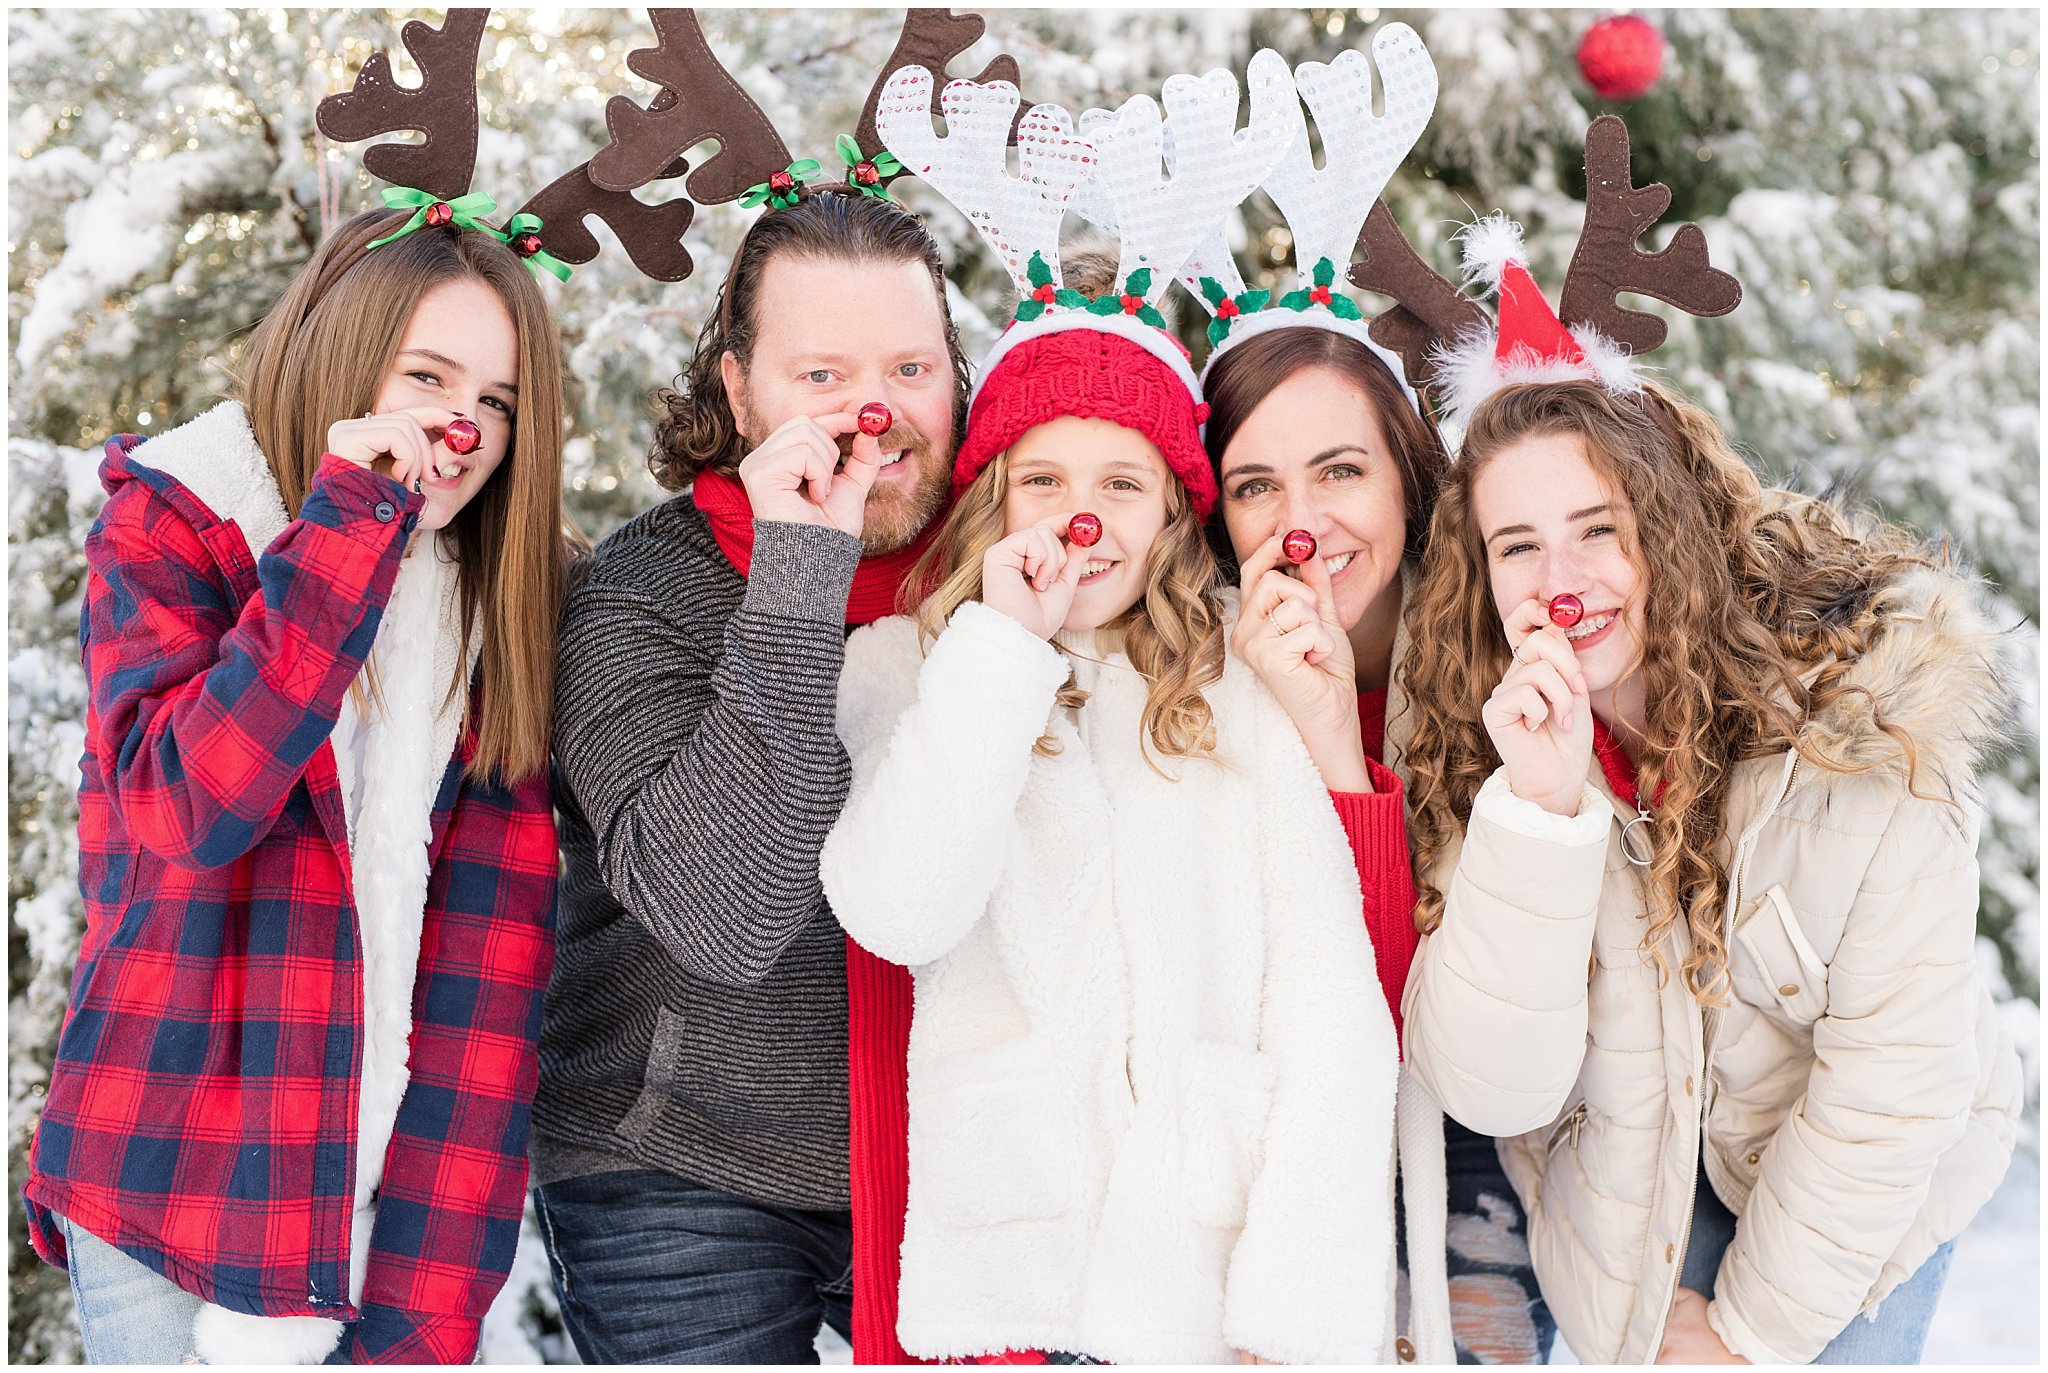 Family wearing rudolph noses and antlers | Utah Family Christmas Photoshoot | Oak Hills Reception and Event | Jessie and Dallin Photography